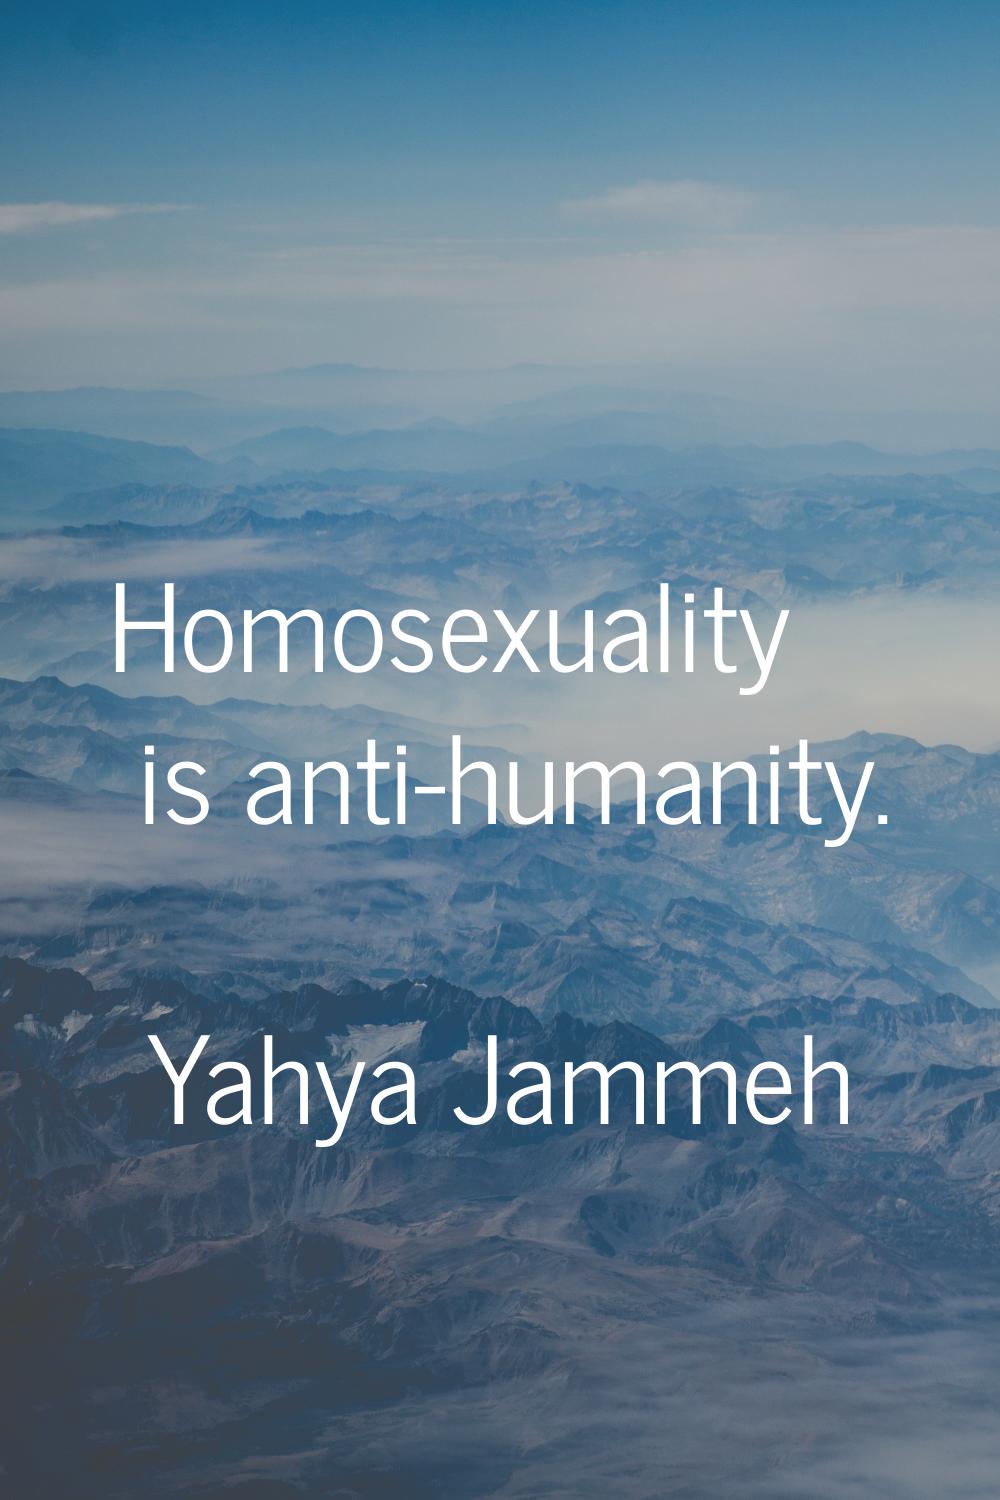 Homosexuality is anti-humanity.